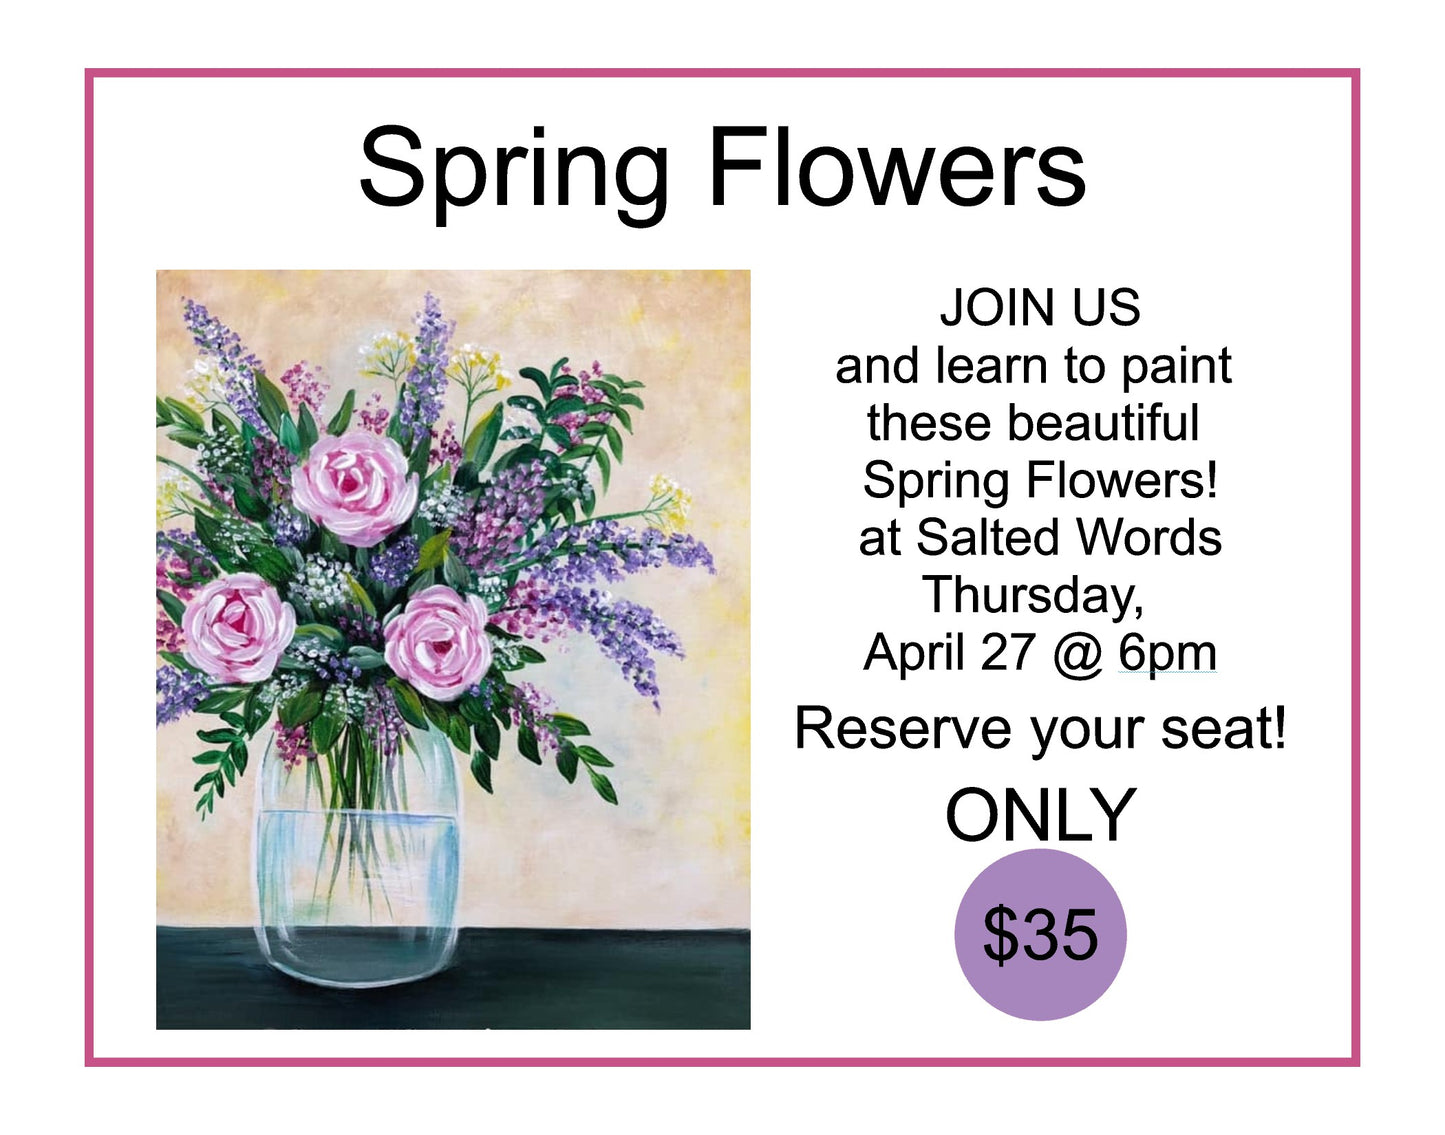 April 27 - Spring Flowers Paint Class @ Salted Words